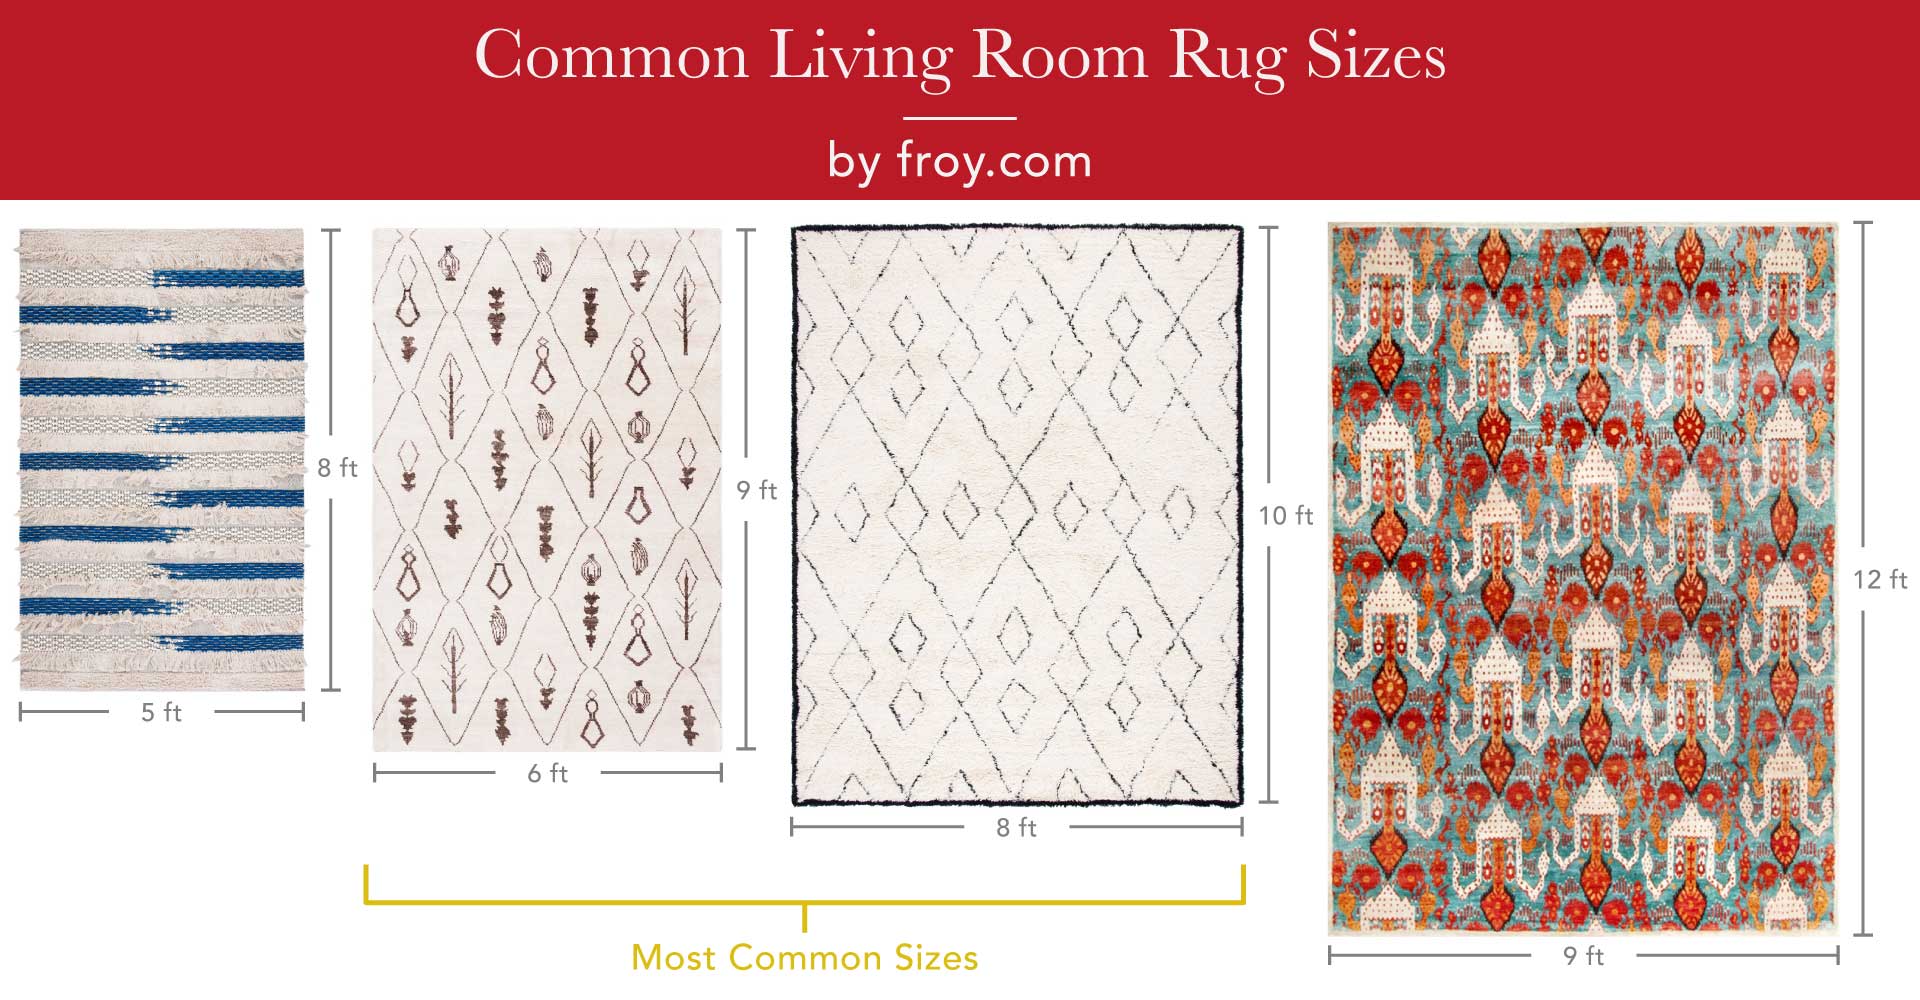 Common Living Room Rug Sizes